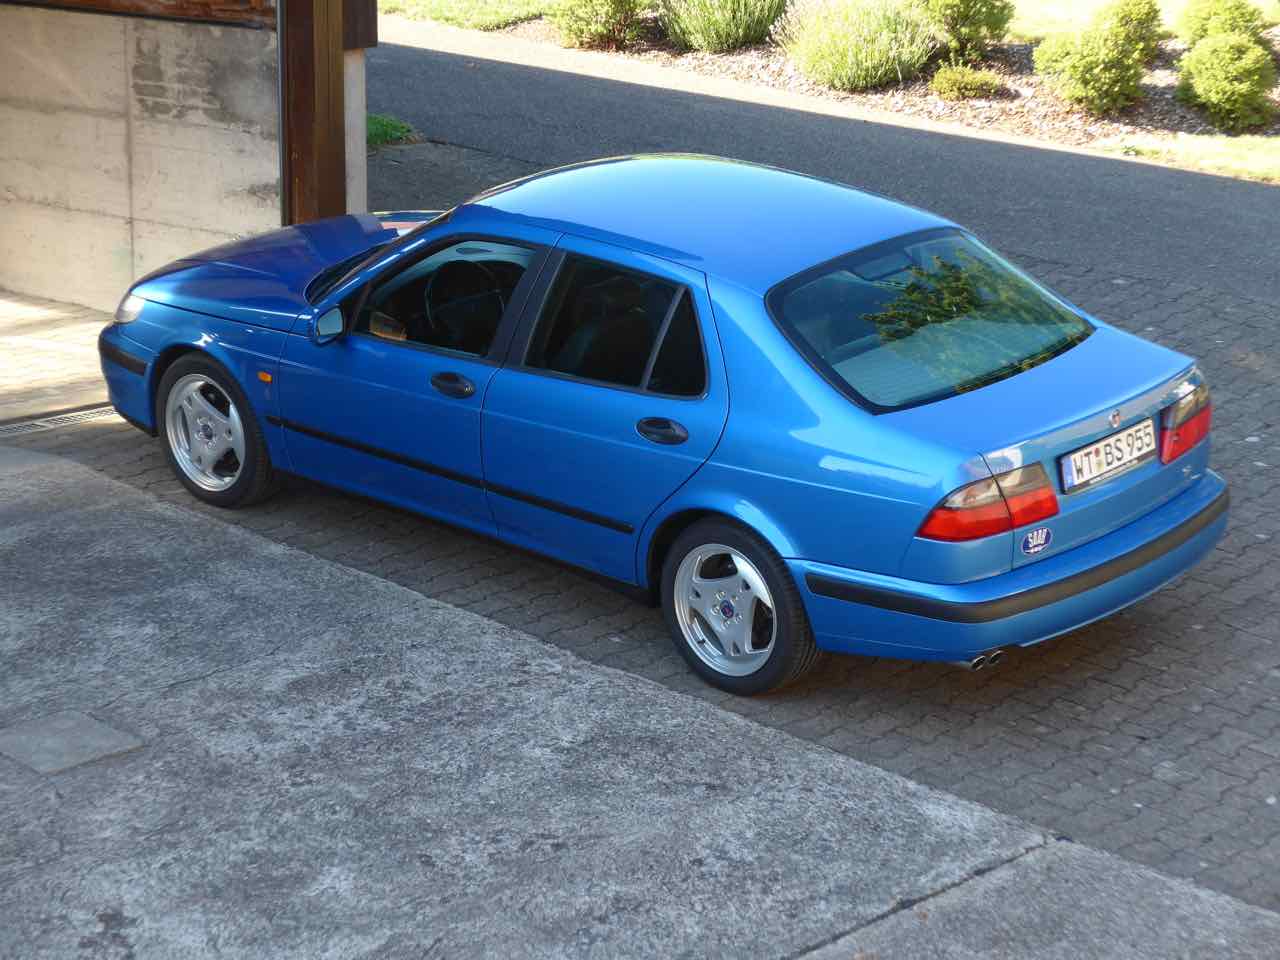 From old to (almost) new Saab 9-5 3.0t V6 1999 in Sky-Blue Metallic